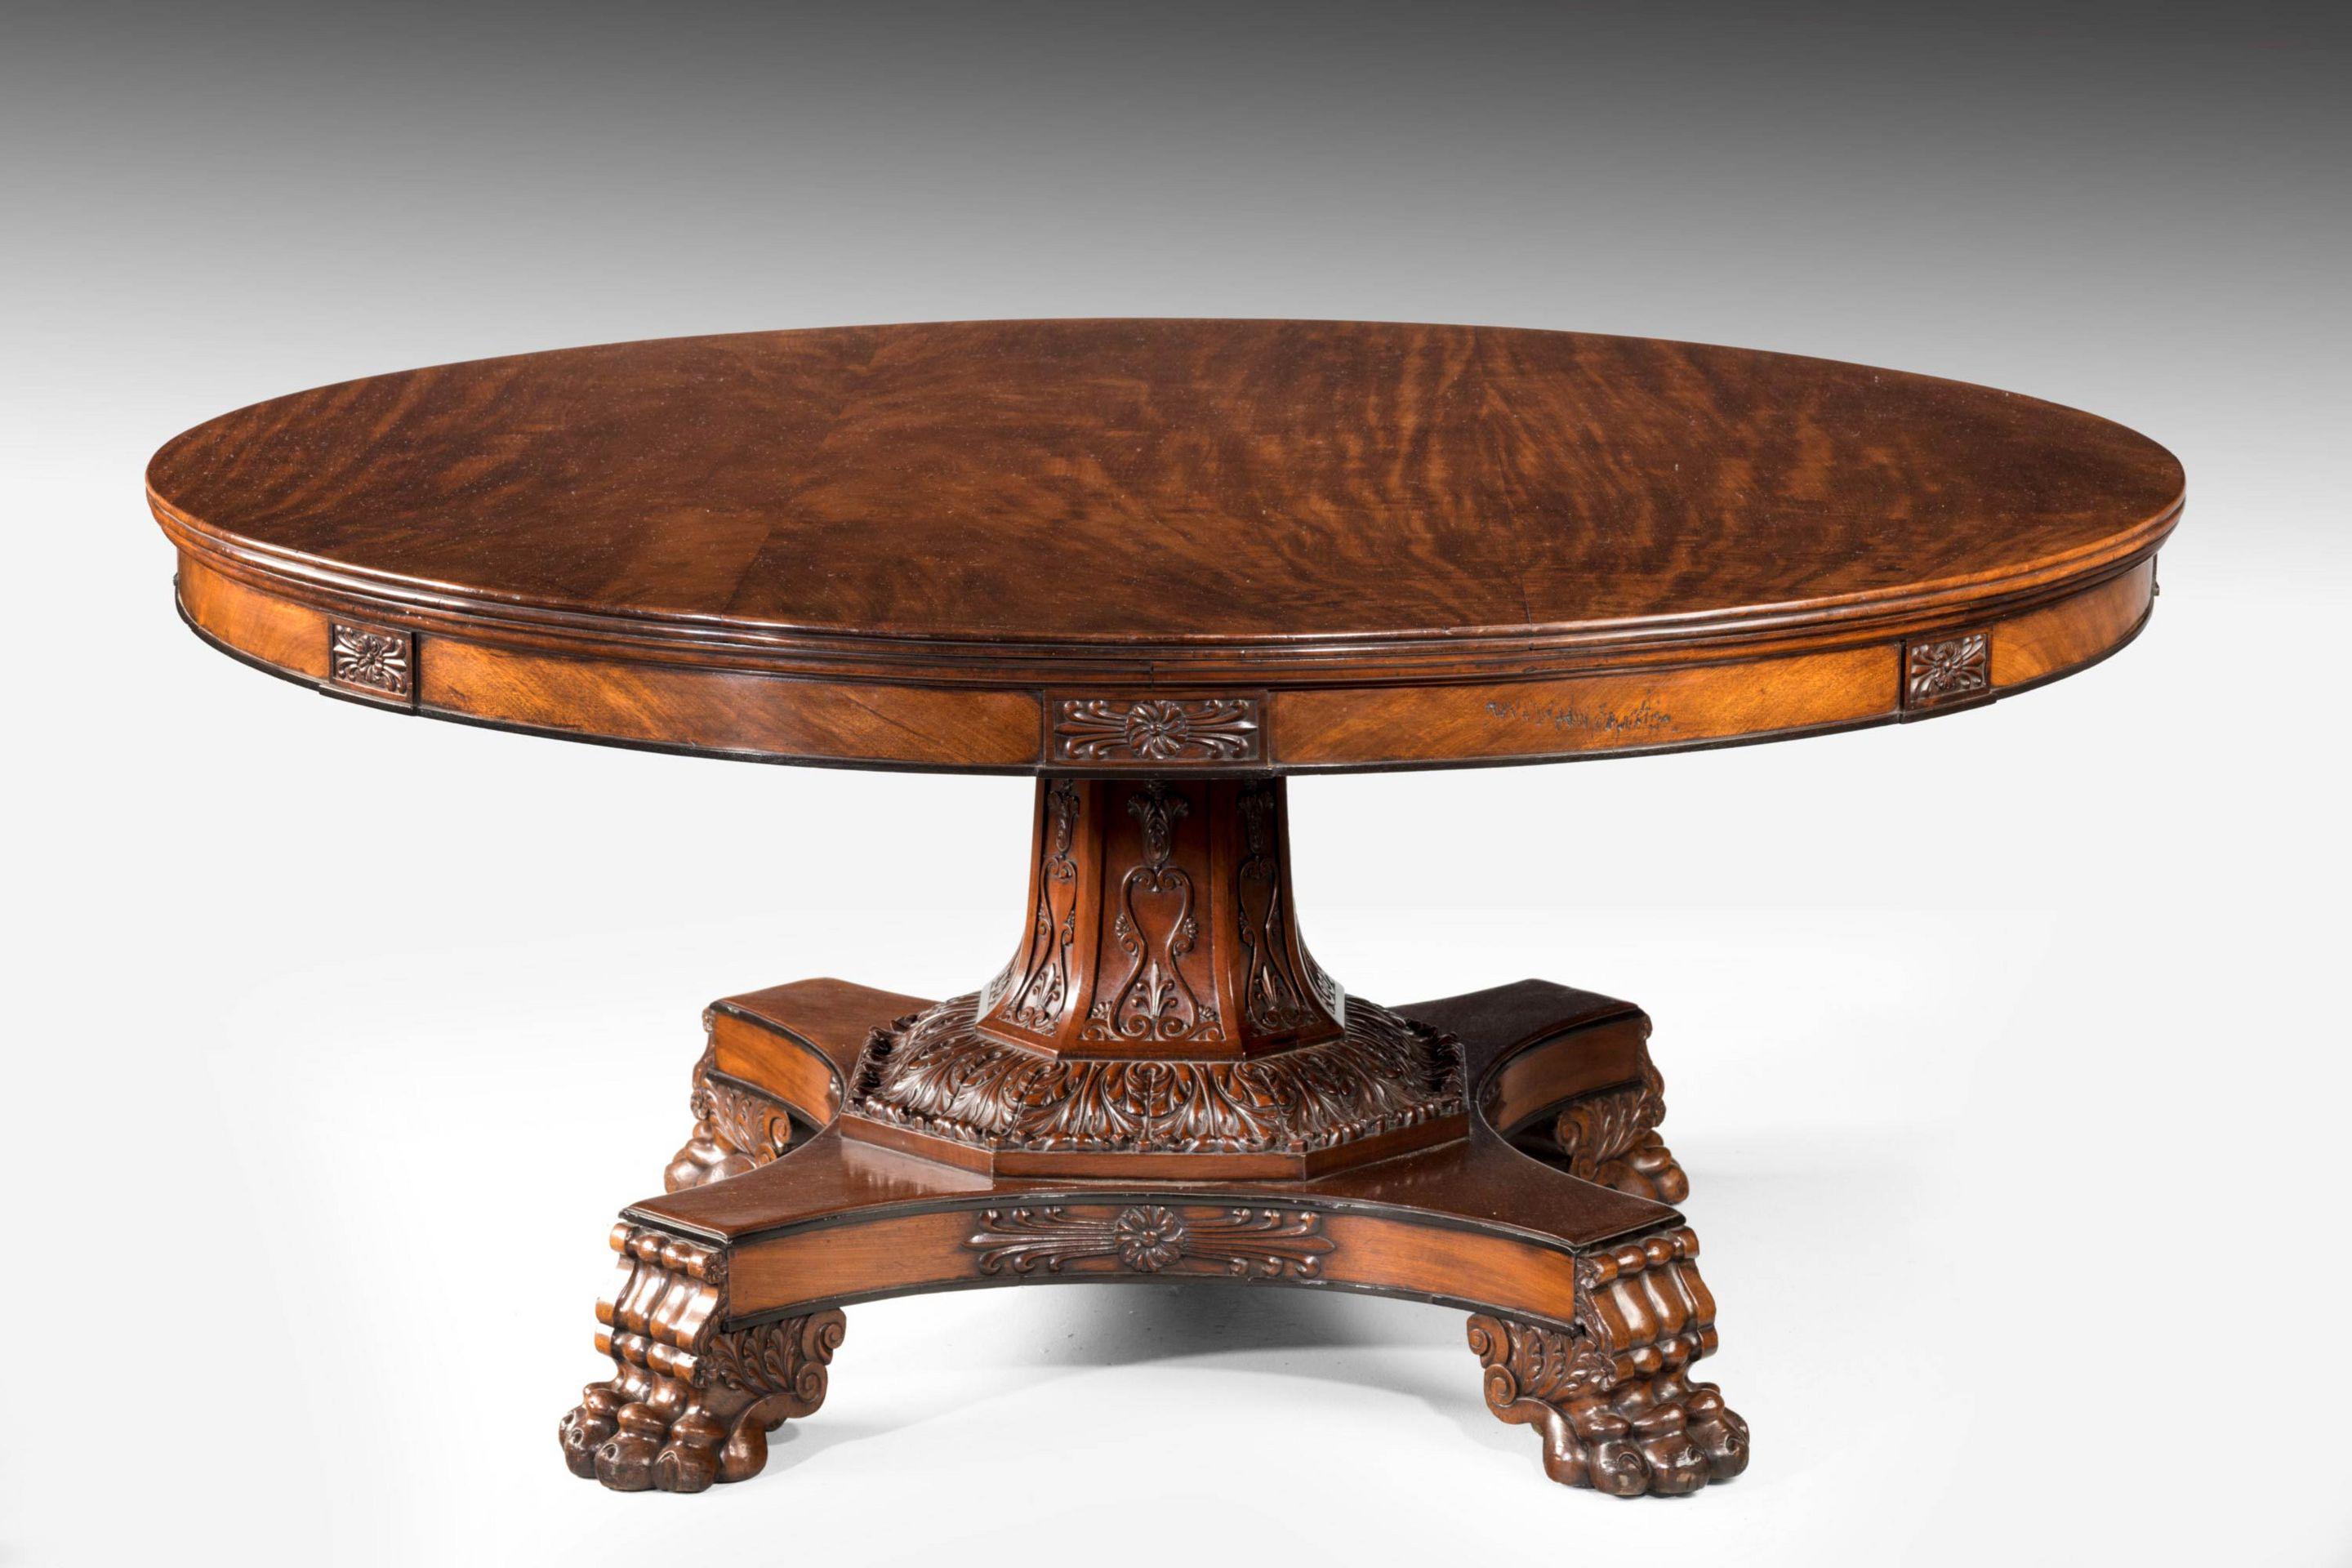 A Large Scottish Regency Mahogany Centre Table

The circular figured mahogany top with a reeded edge, above a figured mahogany frieze with carved rosettes, the hexagonal stem of the base carved with anthemions, resting on bold acanthus leaves, the